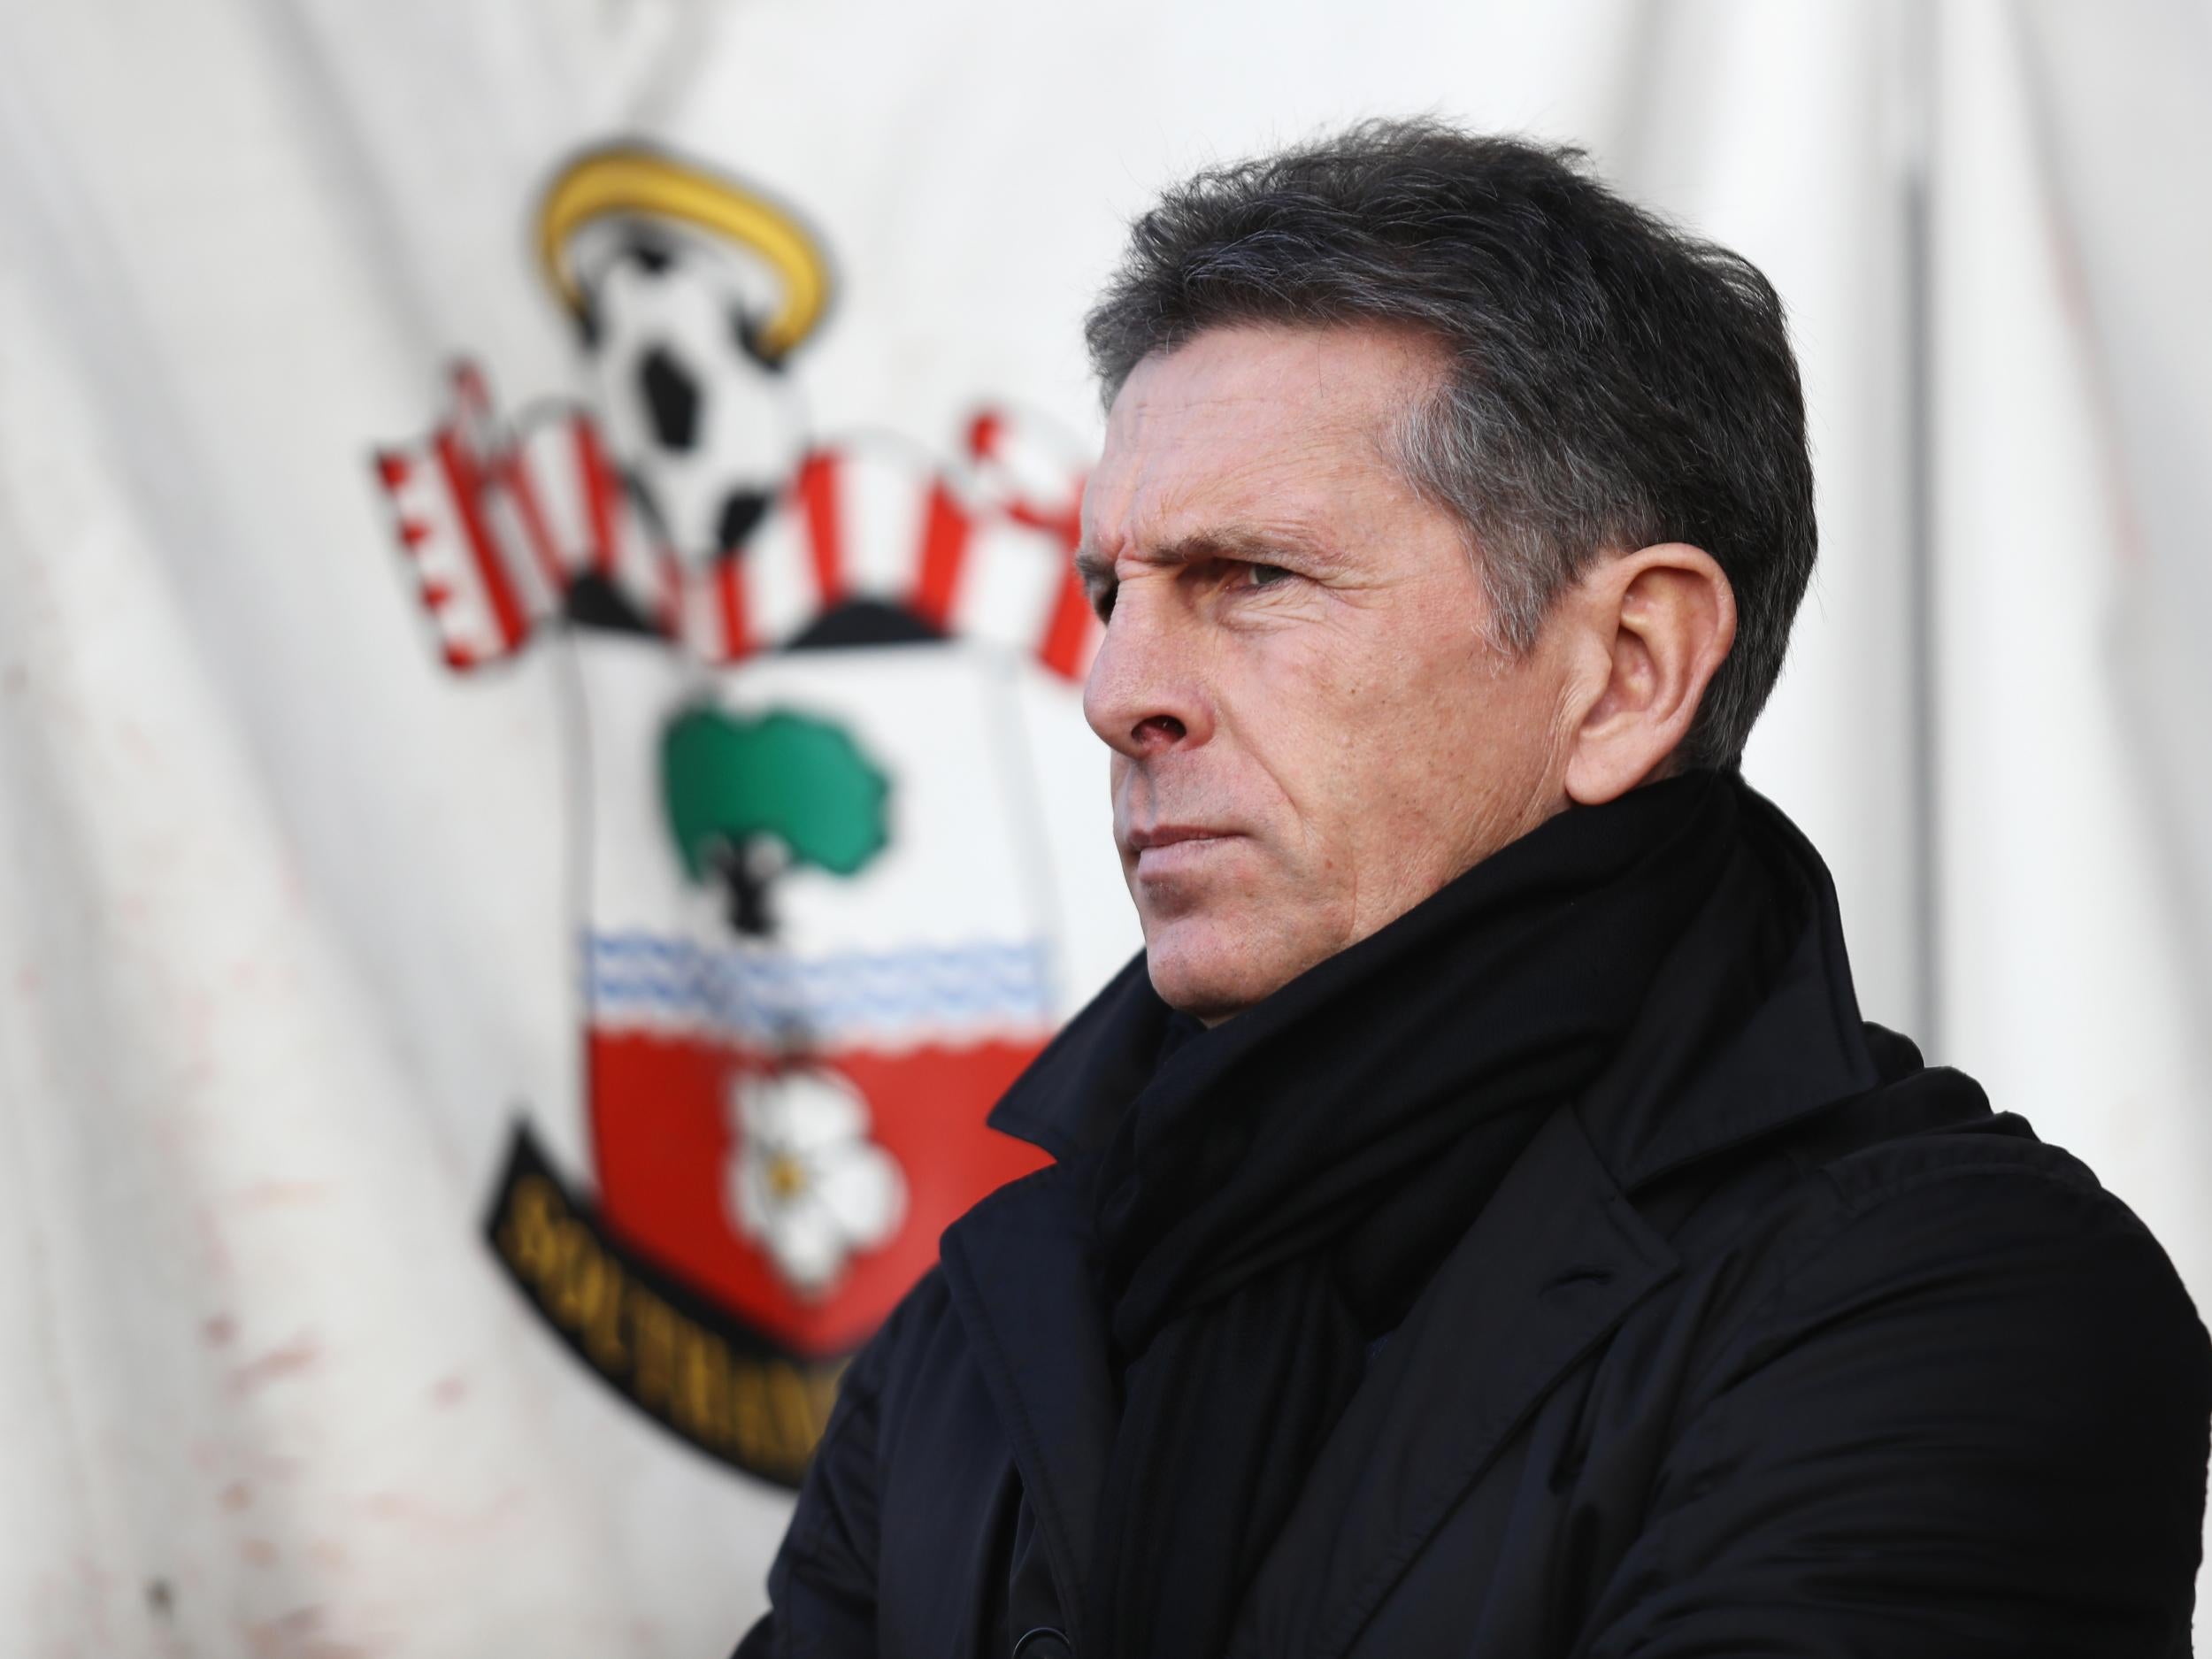 Puel only lasted one season at the club